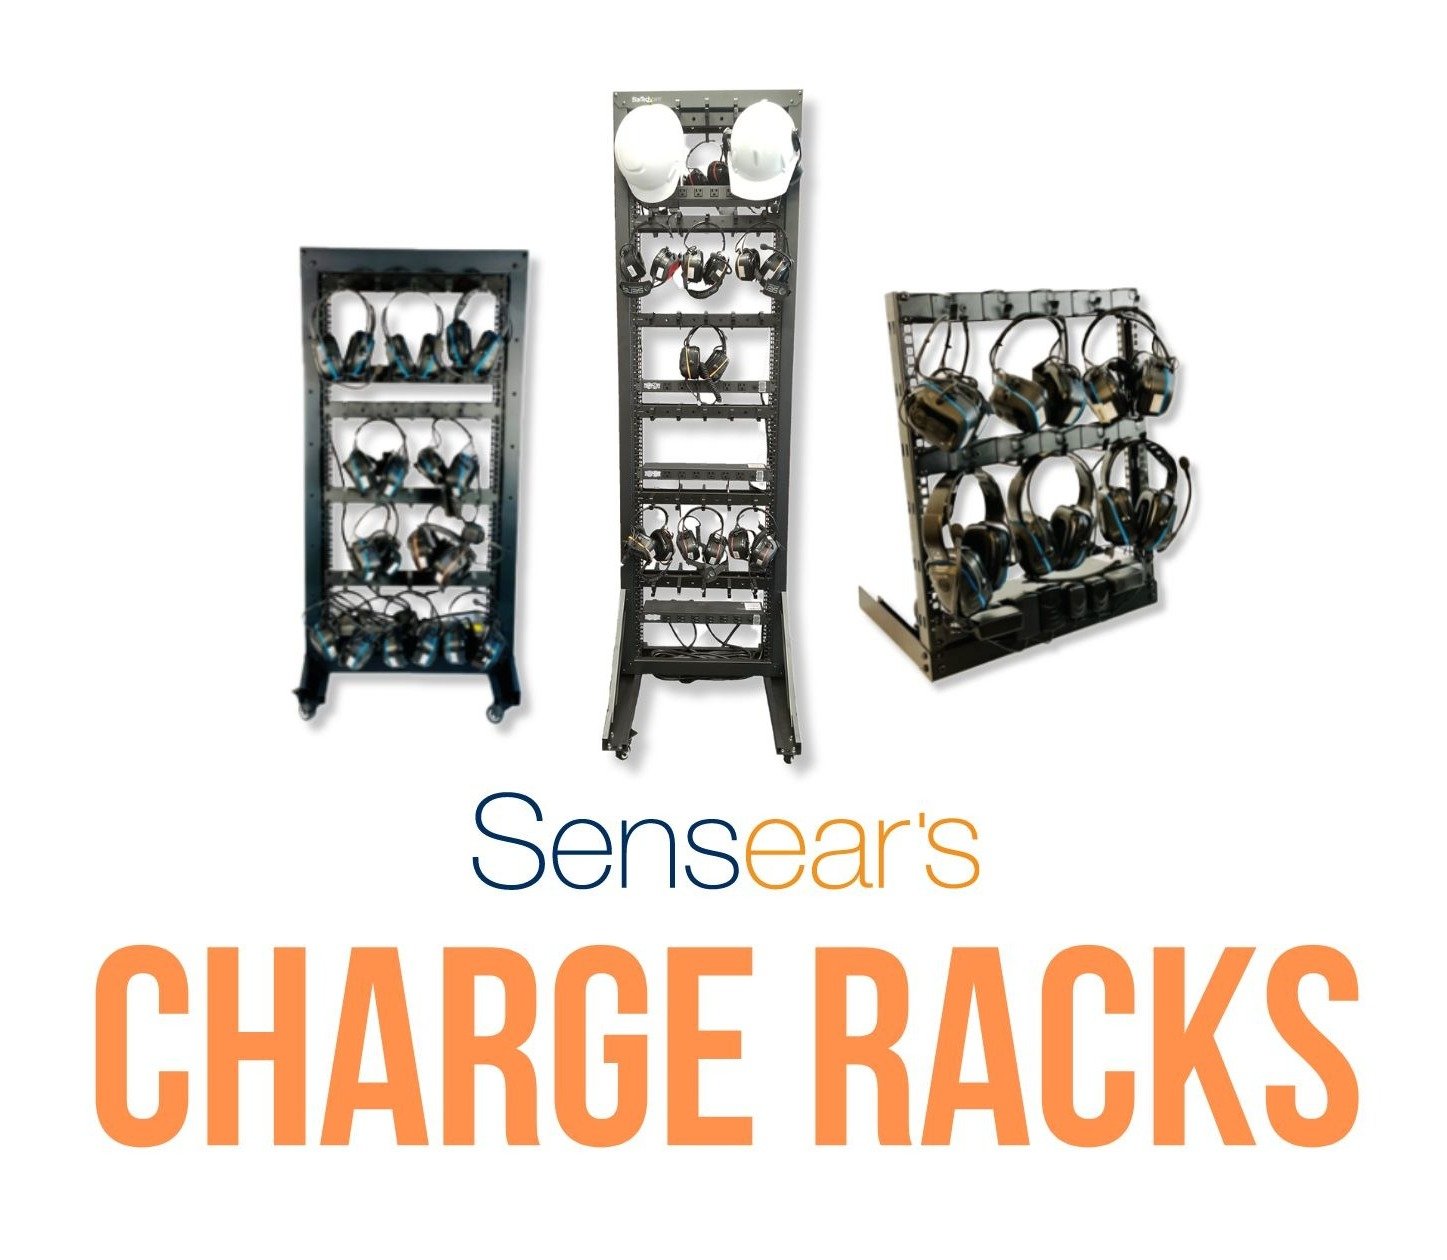 Sensear Expands its Charge Rack Product Range